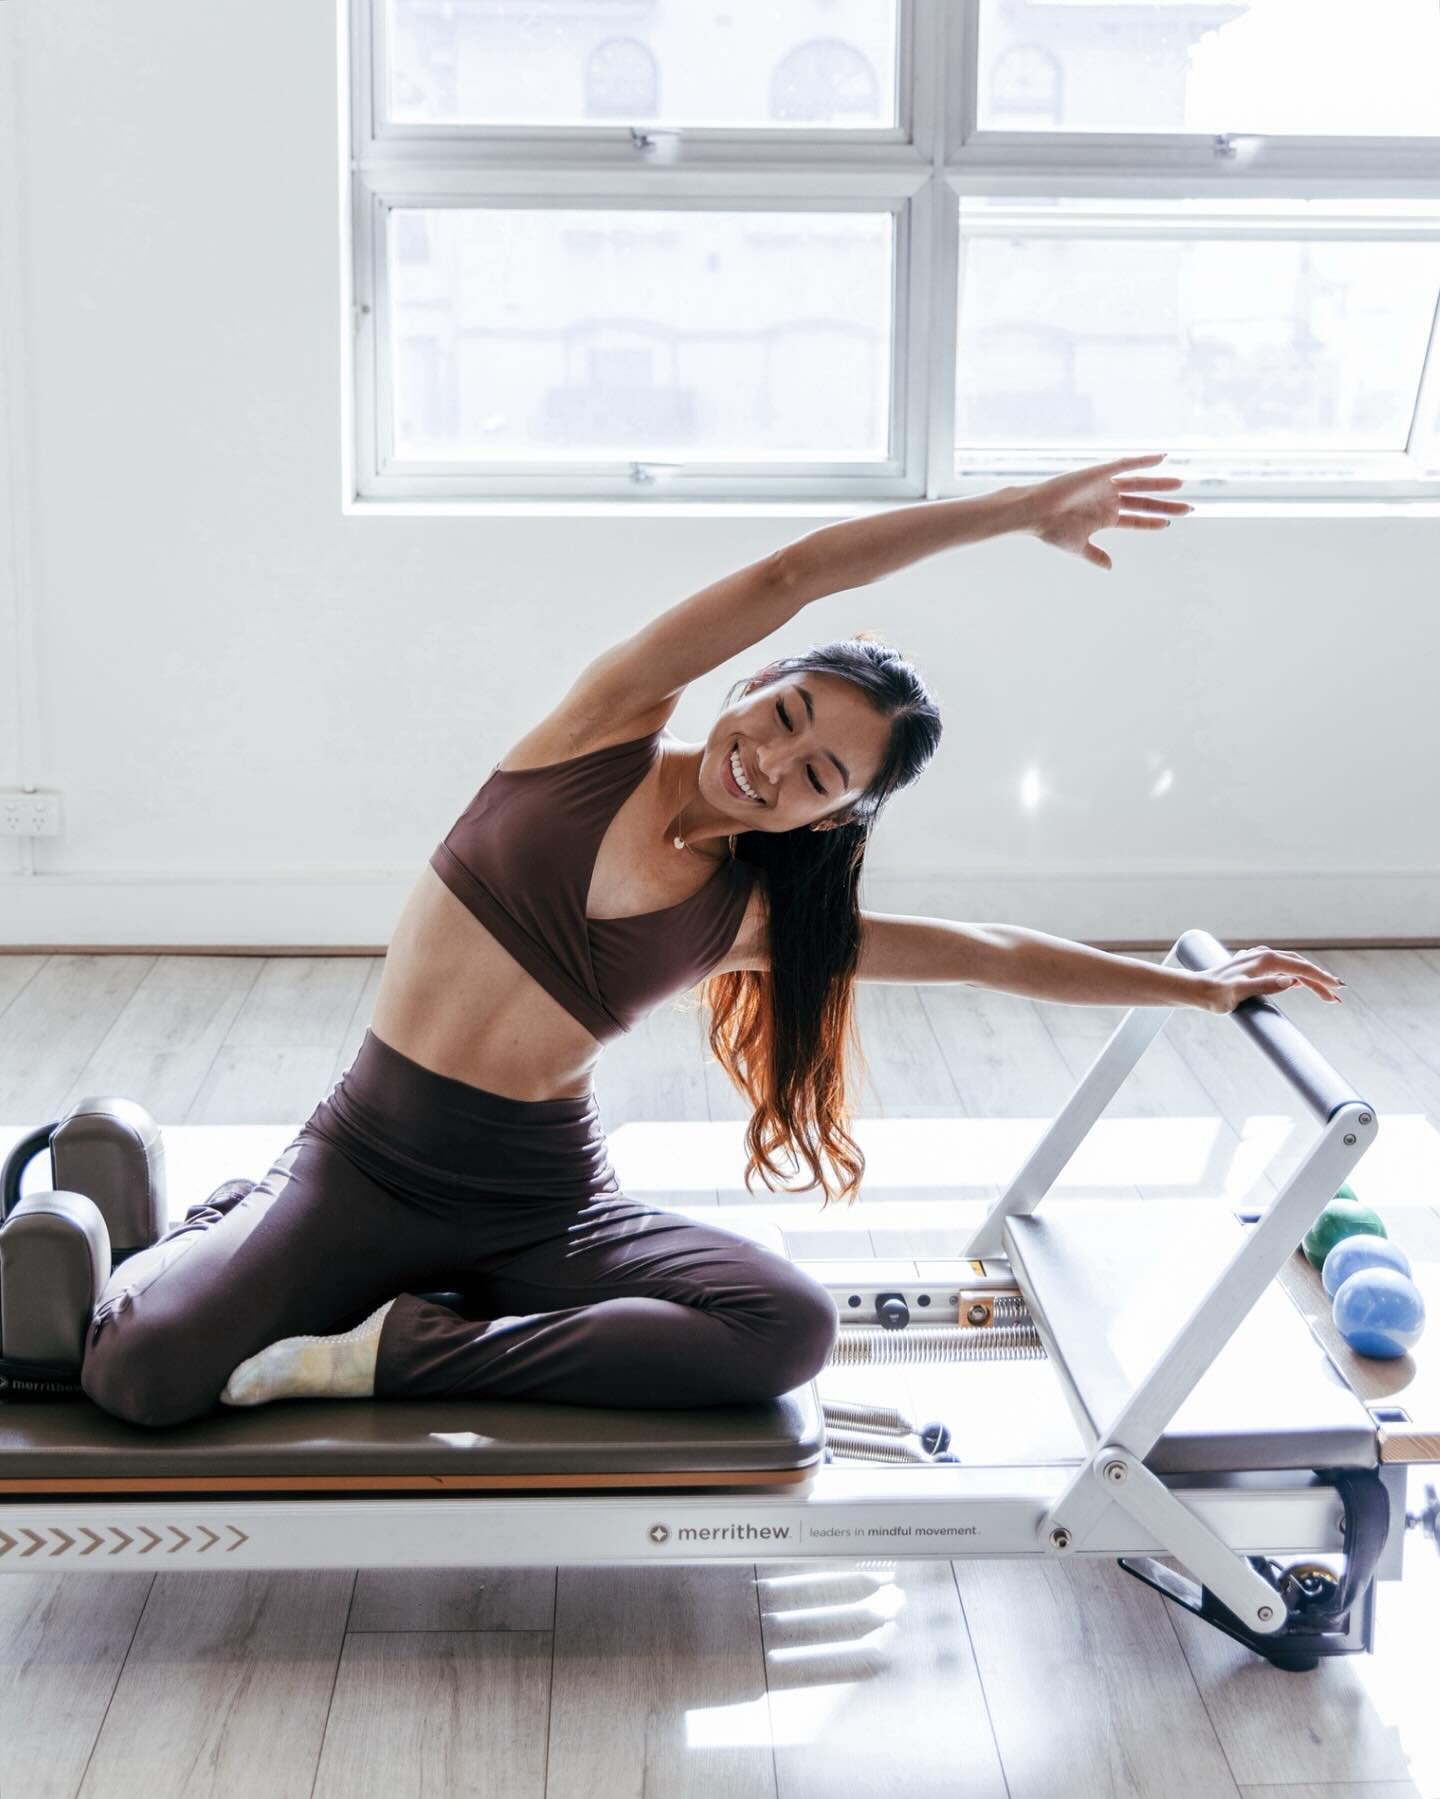 &mdash; JAMIE ♡ &mdash; Have you tried one of Jamie&rsquo;s reformer classes yet?! 

As of this week, you can join Jamie every Wednesday PM, Friday AM &amp; alternating Saturday AM for her subtle but effective Reformer classes. Layering the fundament